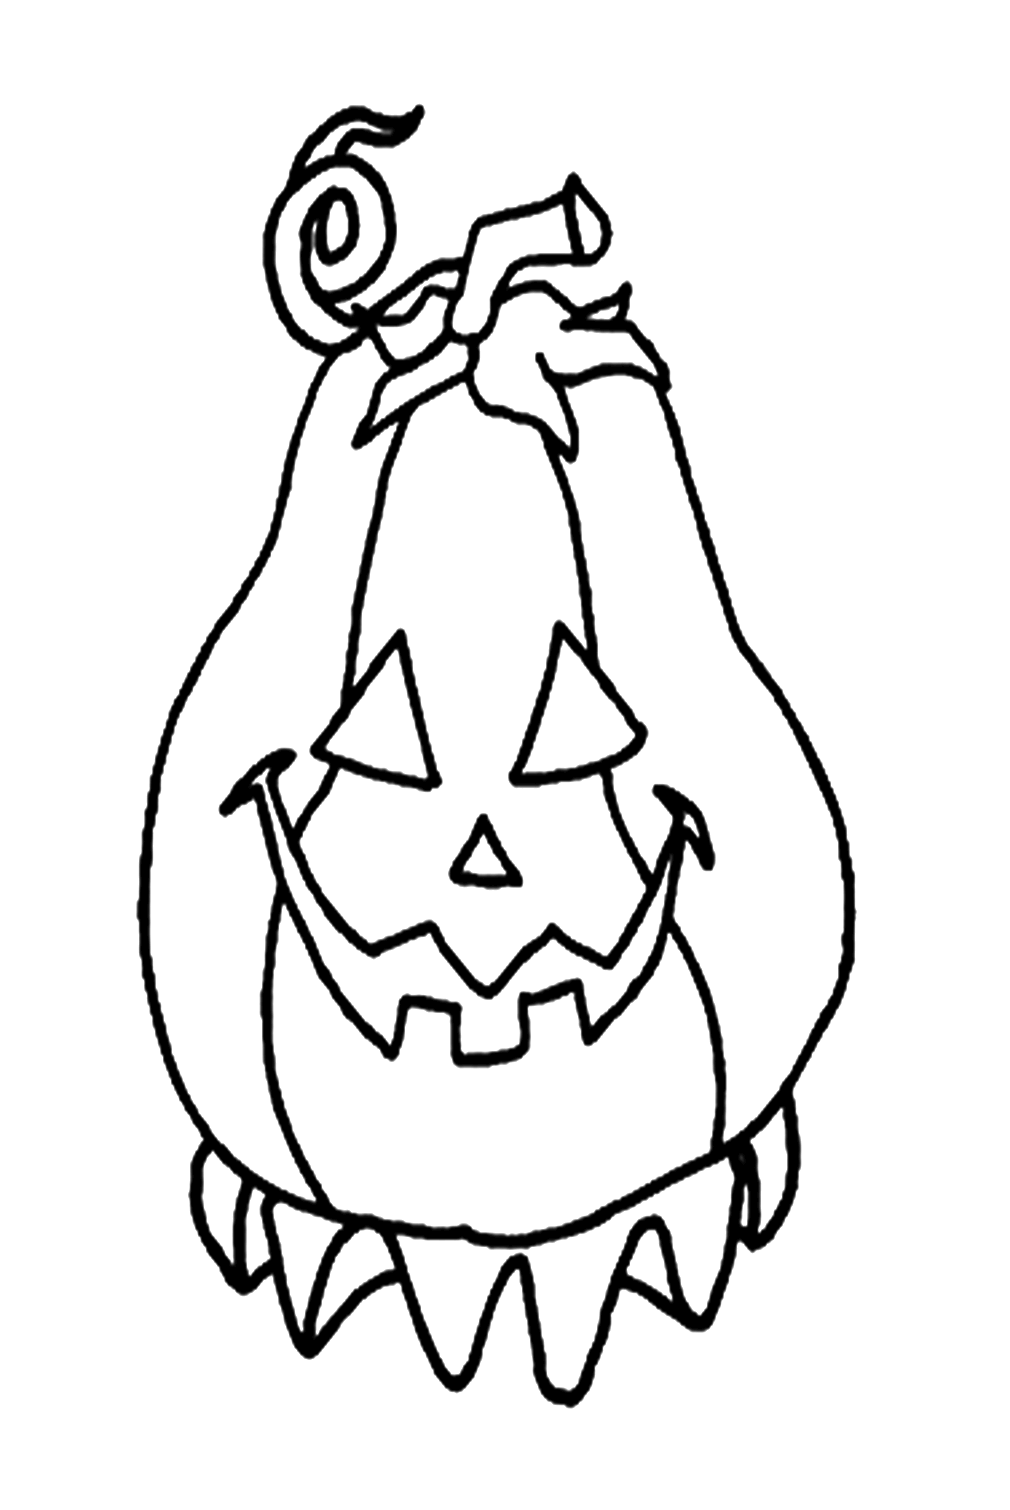 Haunted Halloween Pumpkin Coloring Pages